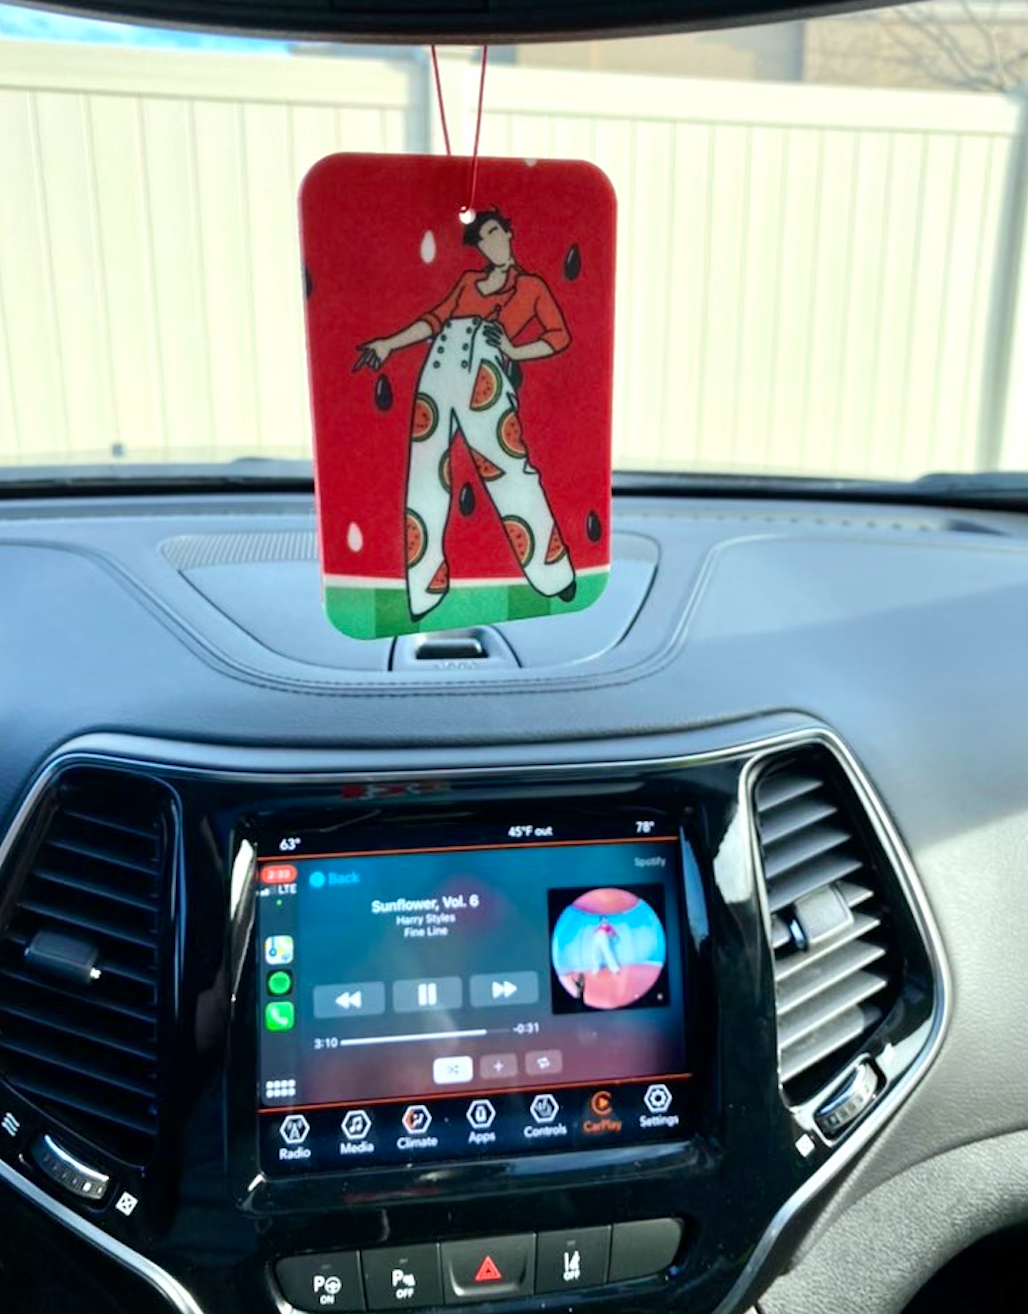 air freshener featuring an illustration of the Watermelon Sugar cover art hanging in a BuzzFeed editor's car